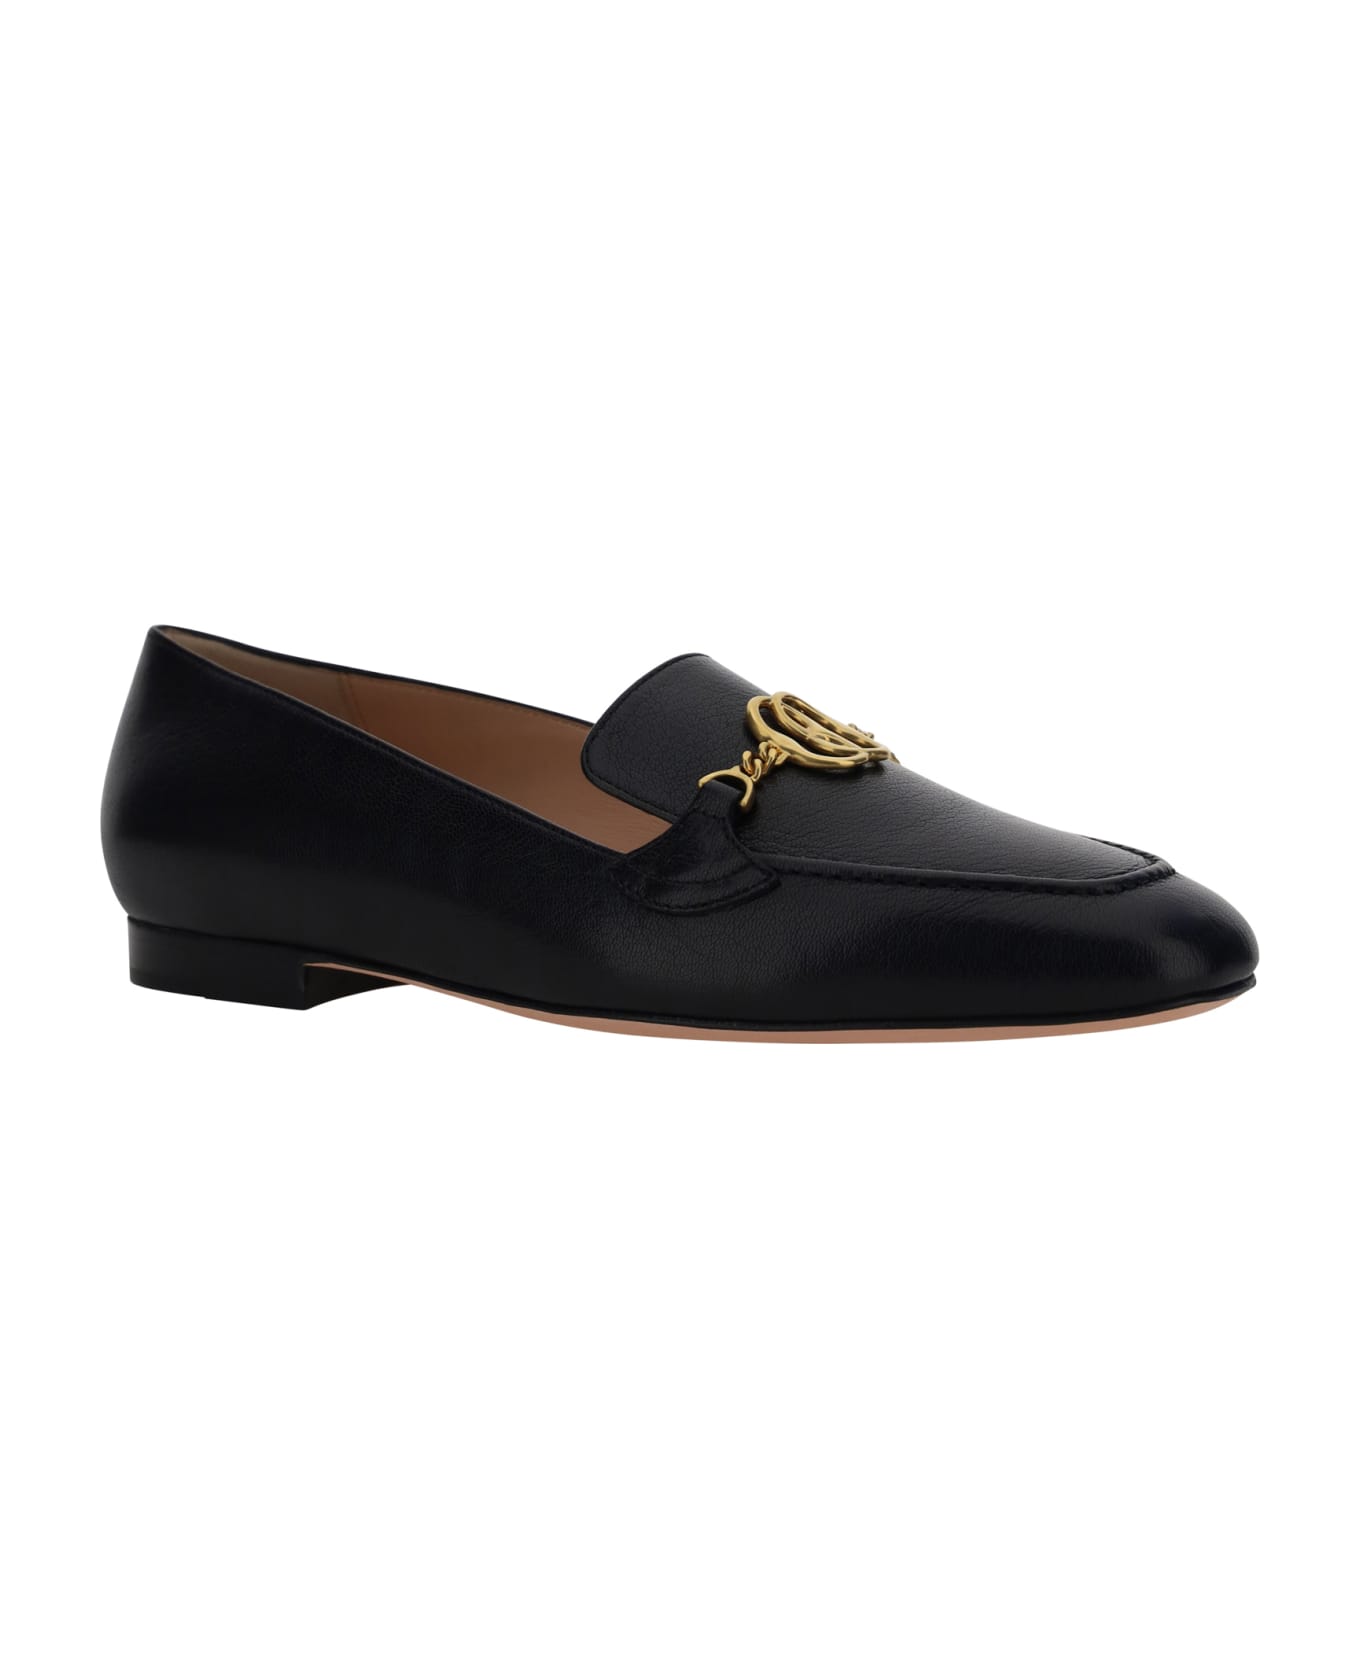 Bally Loafers - Black